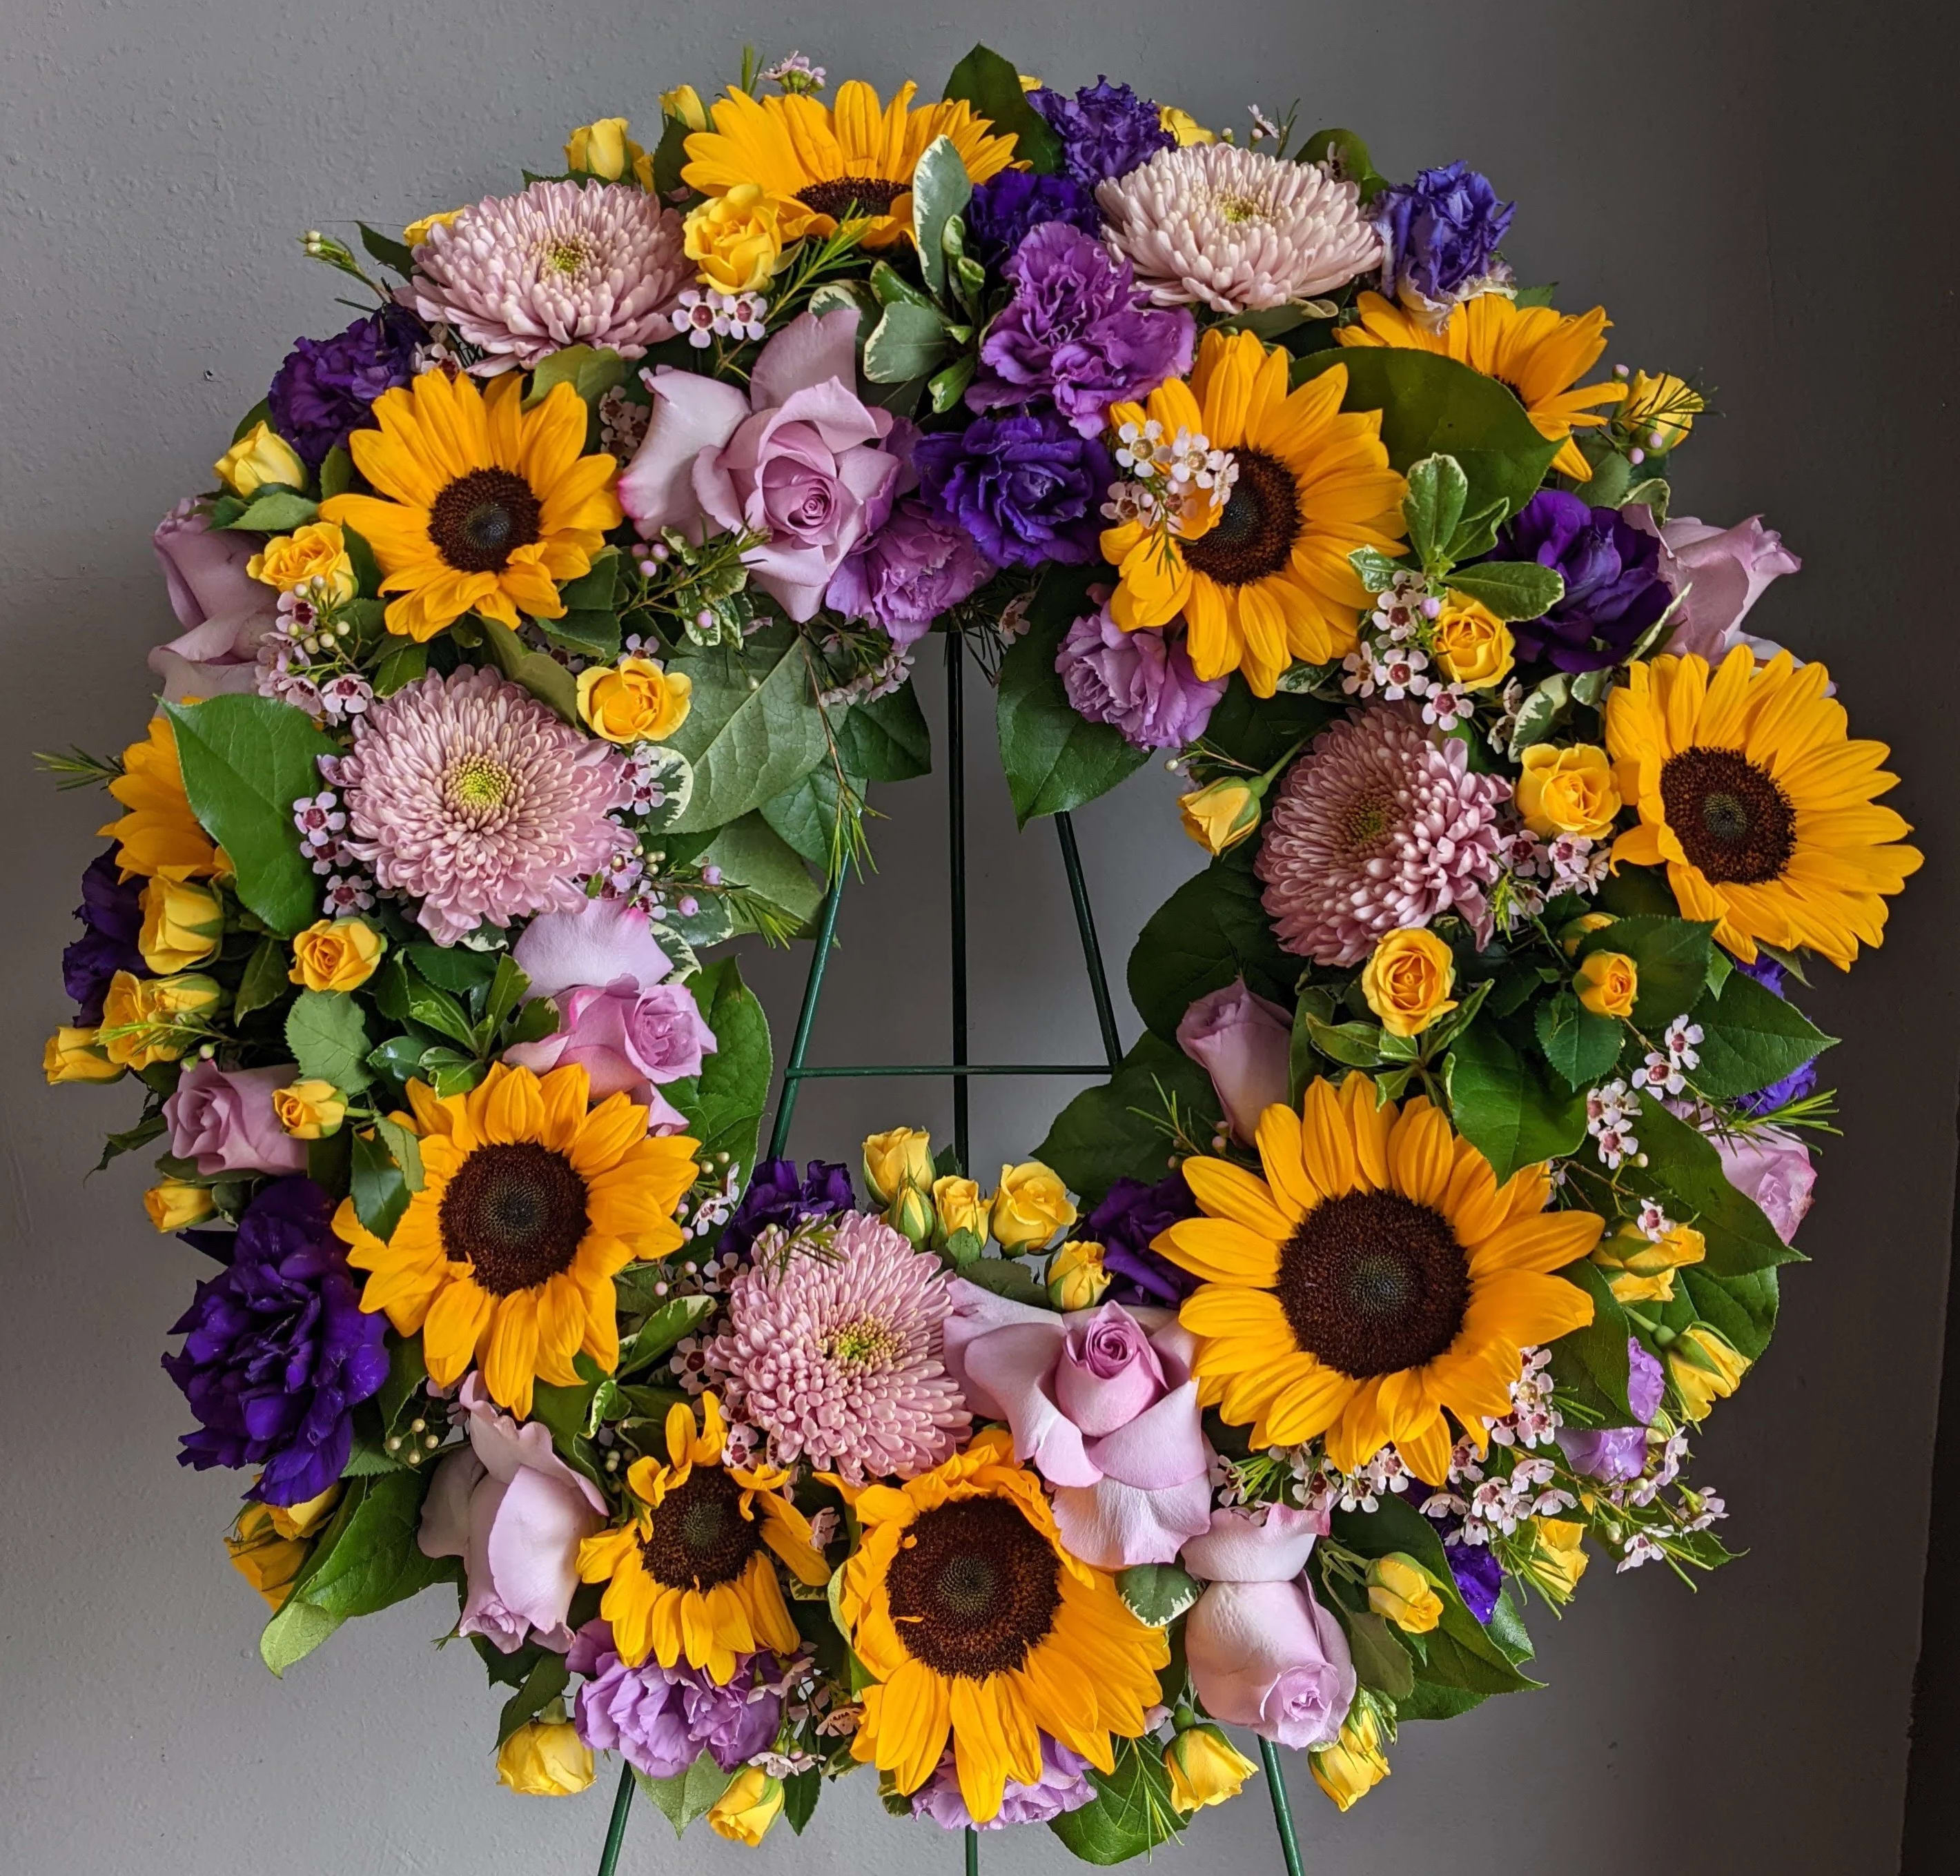 FUNERAL WREATH - For the Love of Sunflowers 115